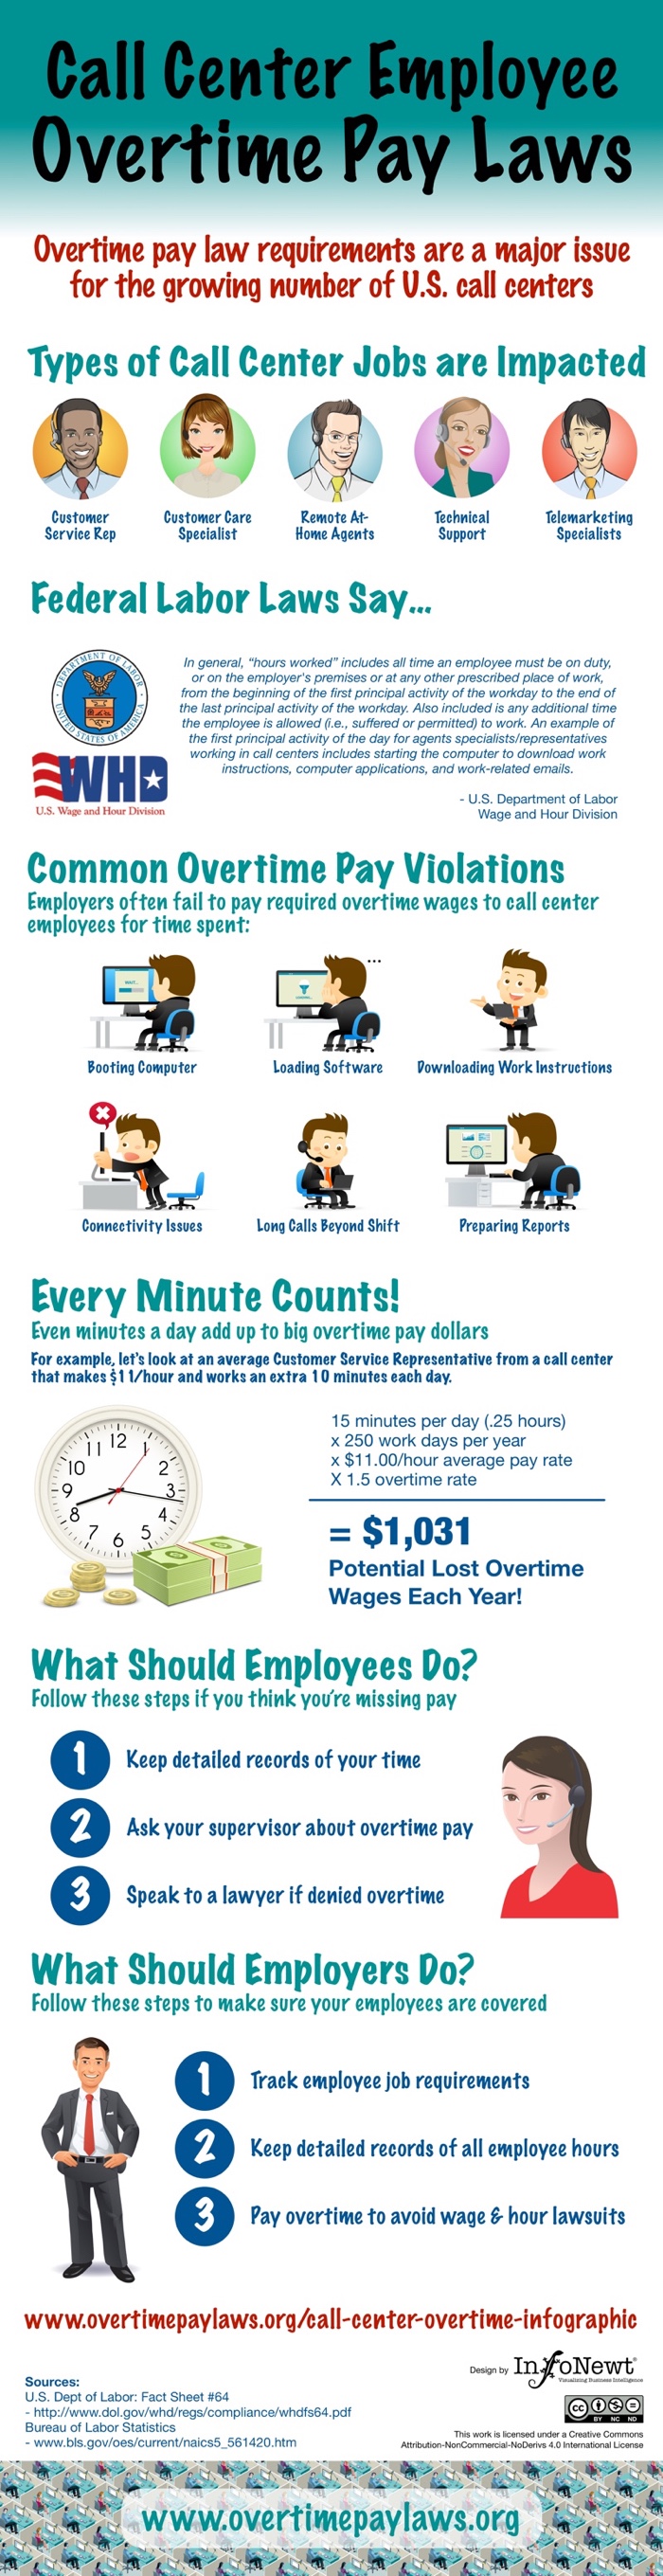 Overtime Pay Laws Call Center Employee Infographic